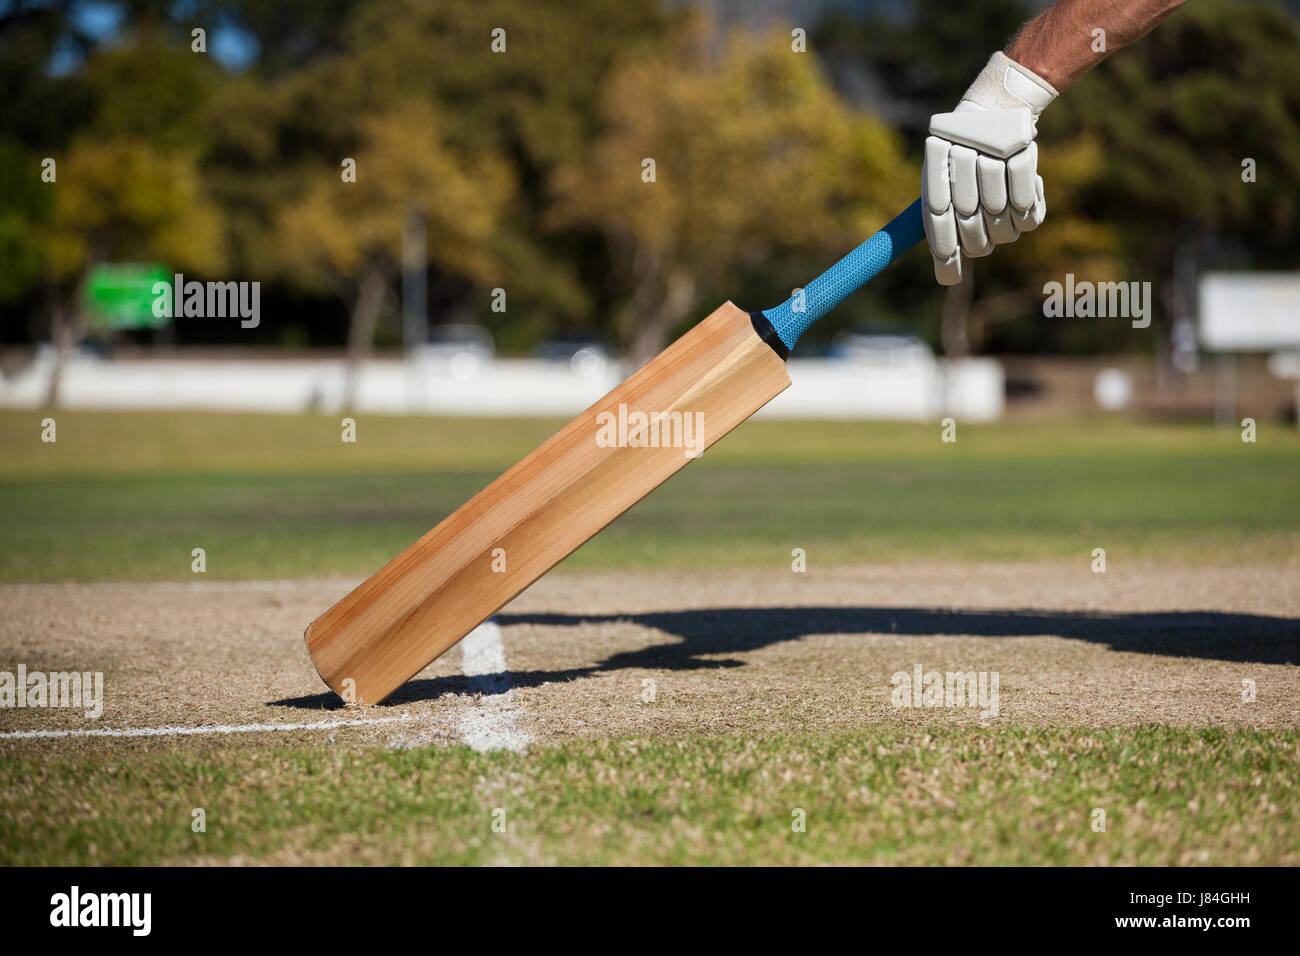 Cropped image of player scoring run on cricket field Stock Photo